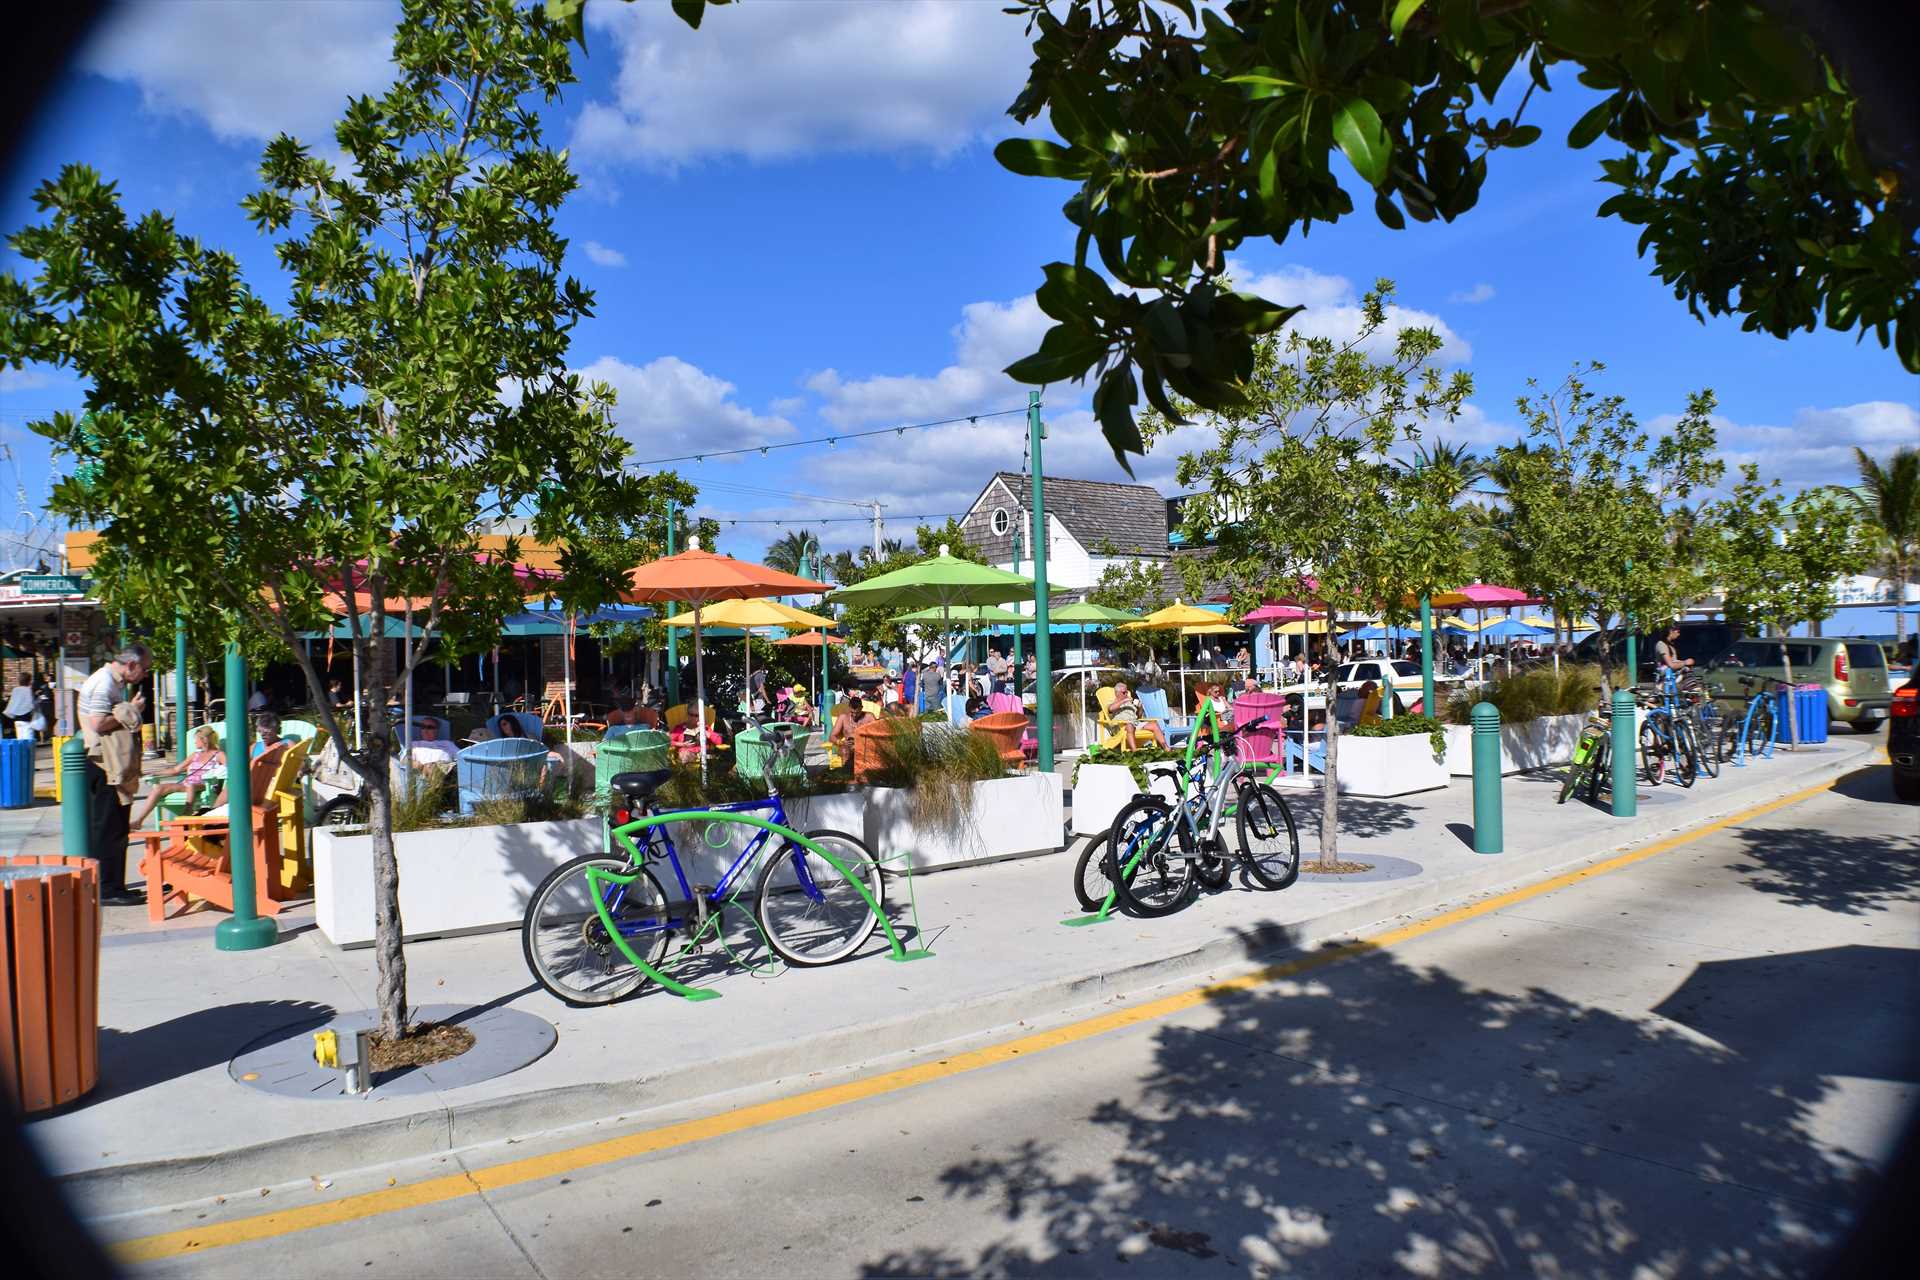 Your walk to the beach is full of colorful shops and cafes.